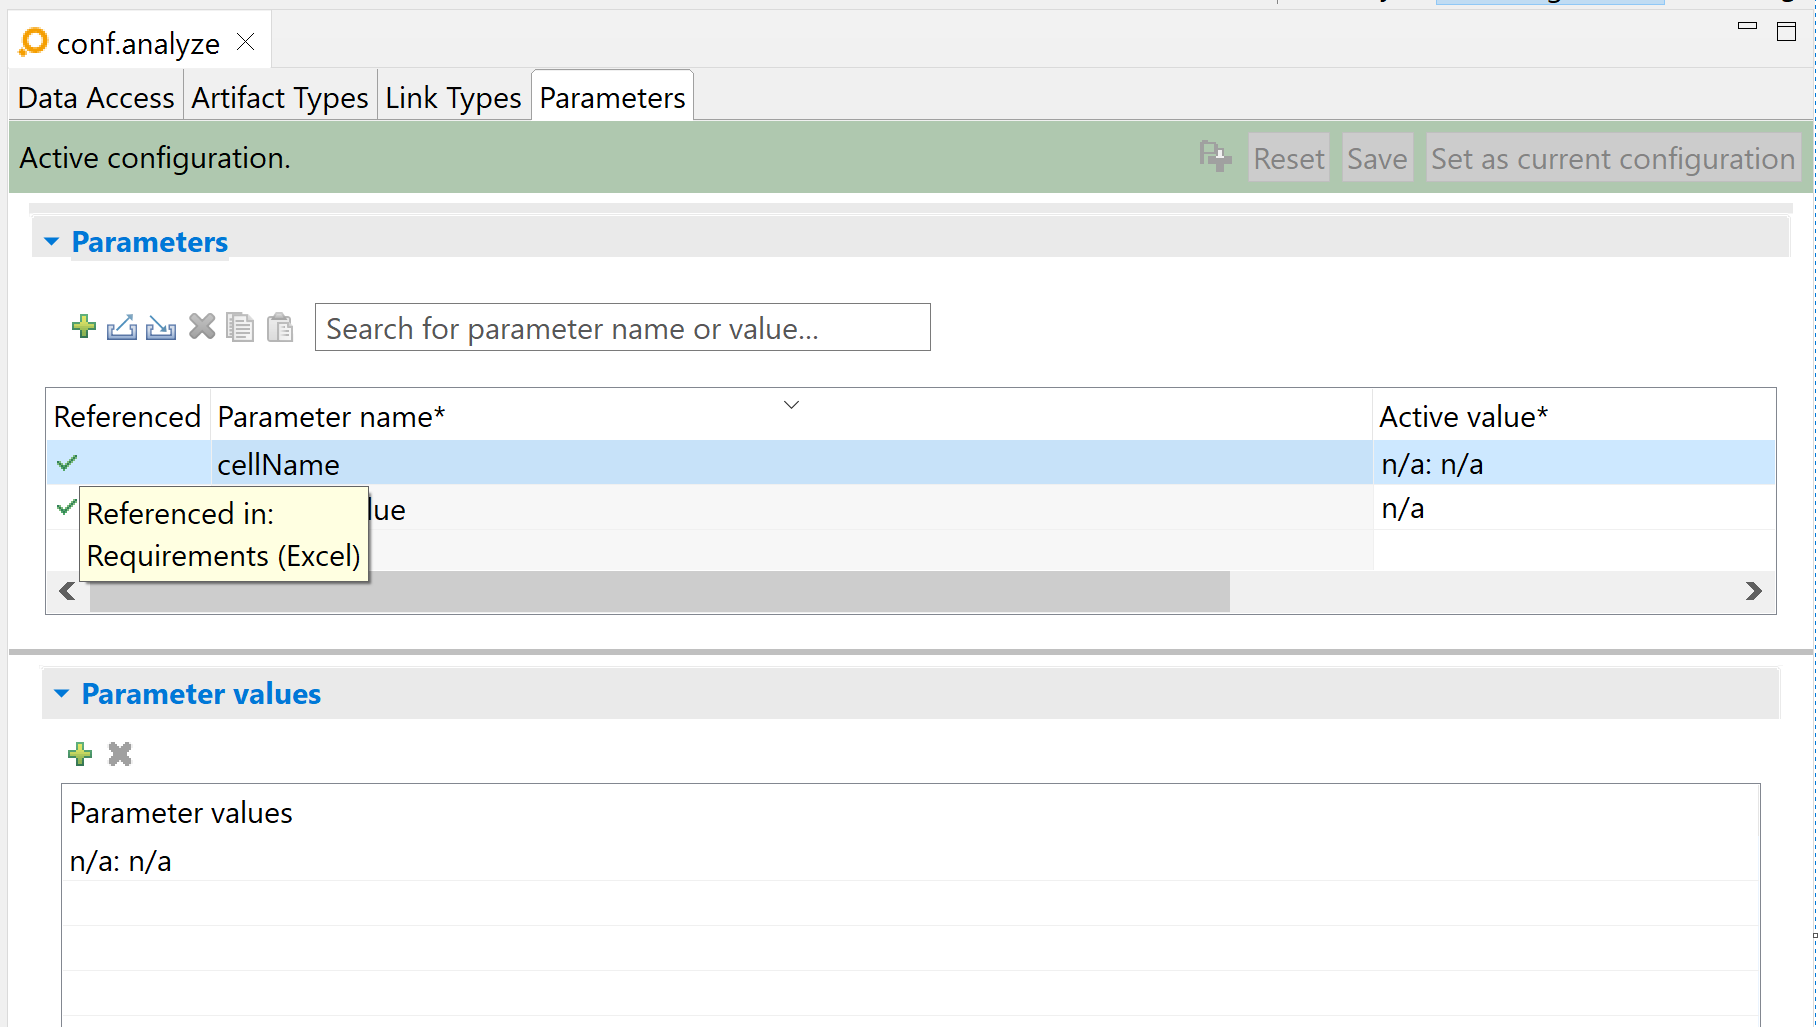 The "Parameters" tab in the "ANALYZE Configuration" editor